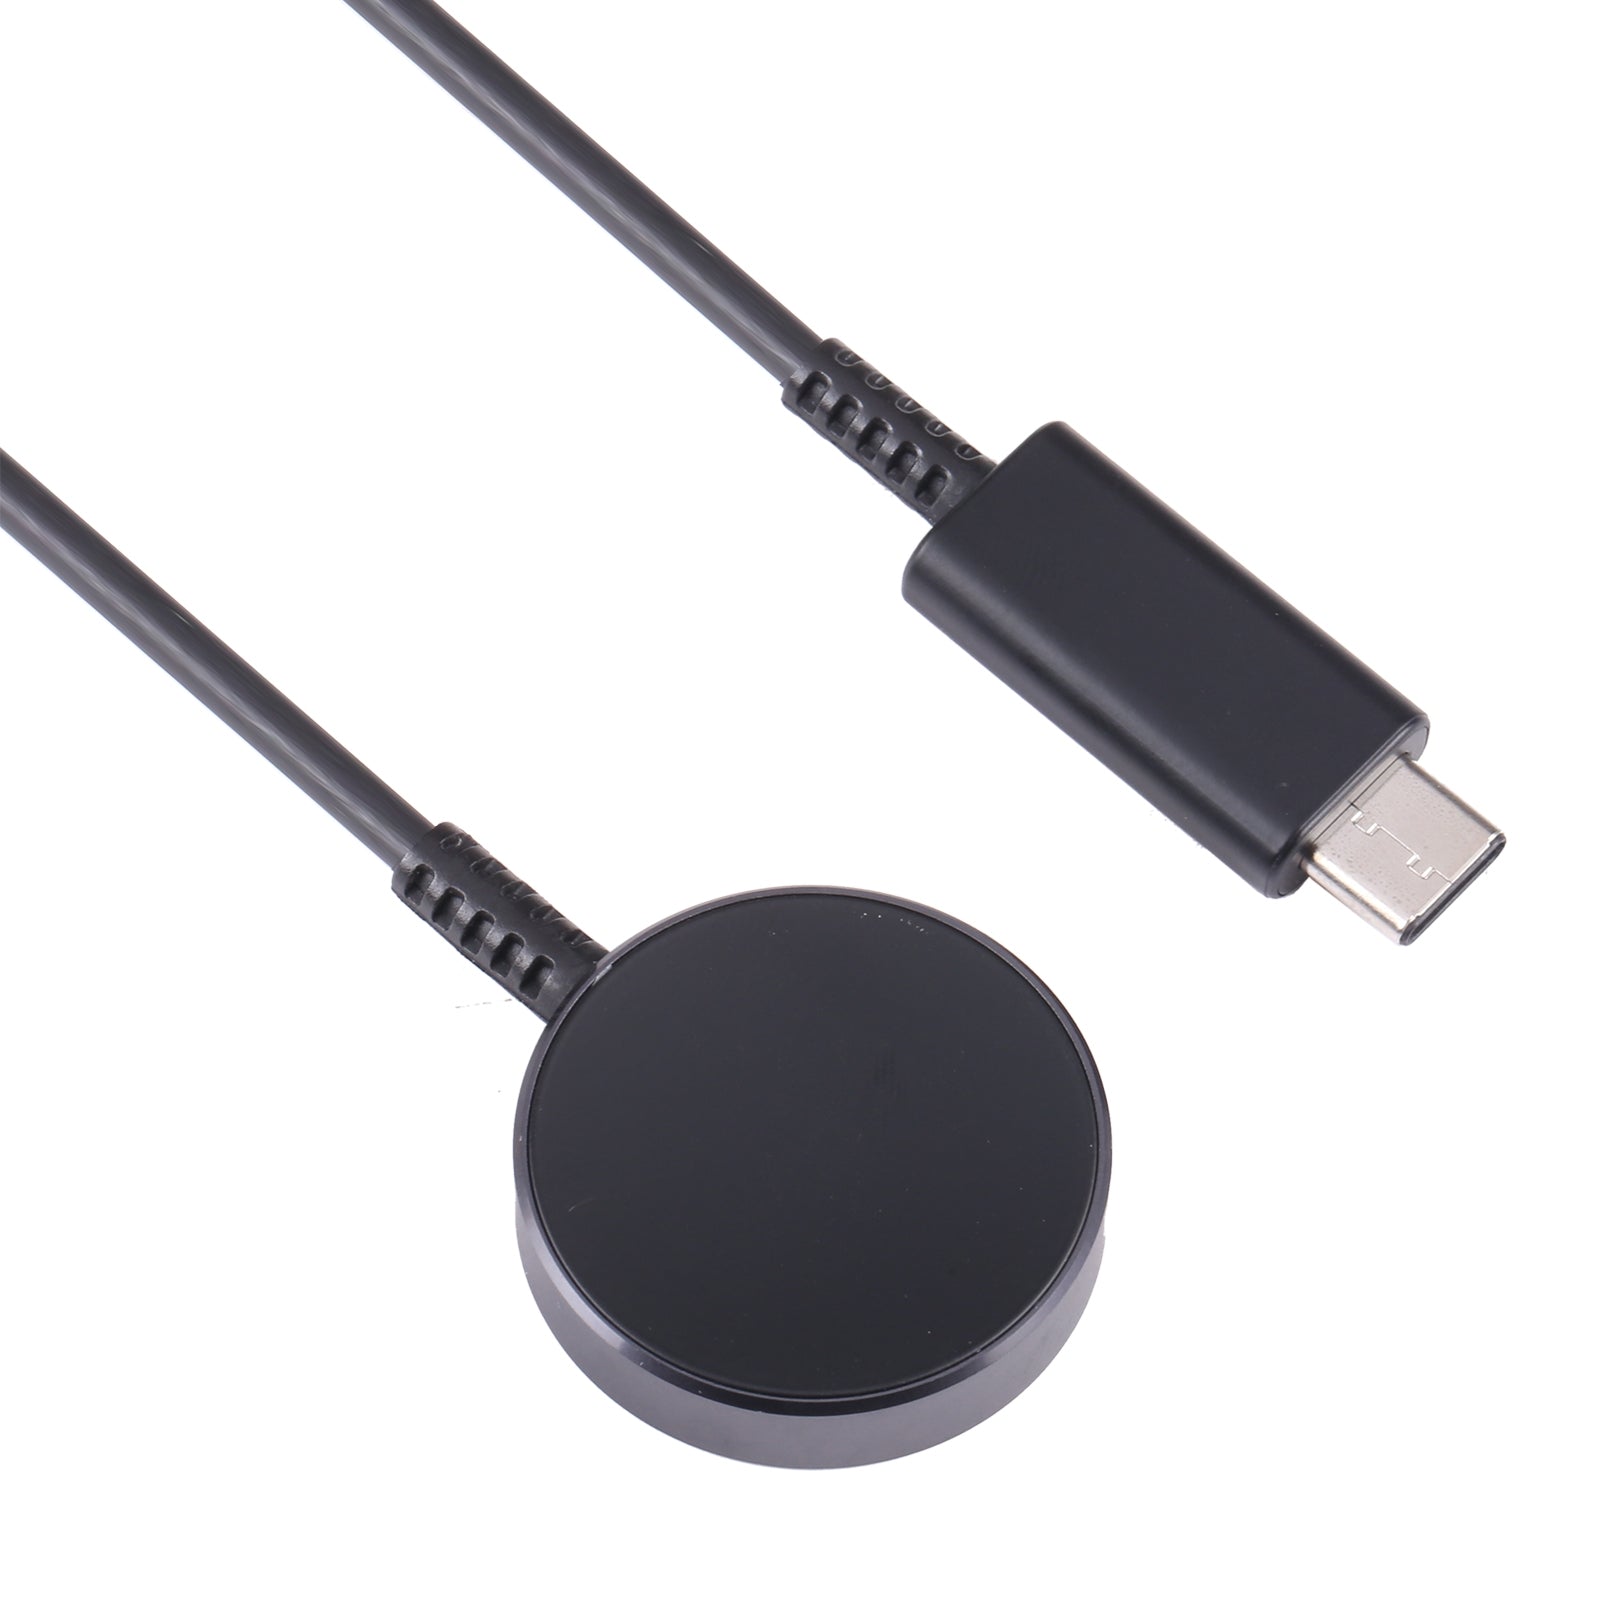 Chargeur rapide USB 44 mm pour Samsung Galaxy Watch4 R870